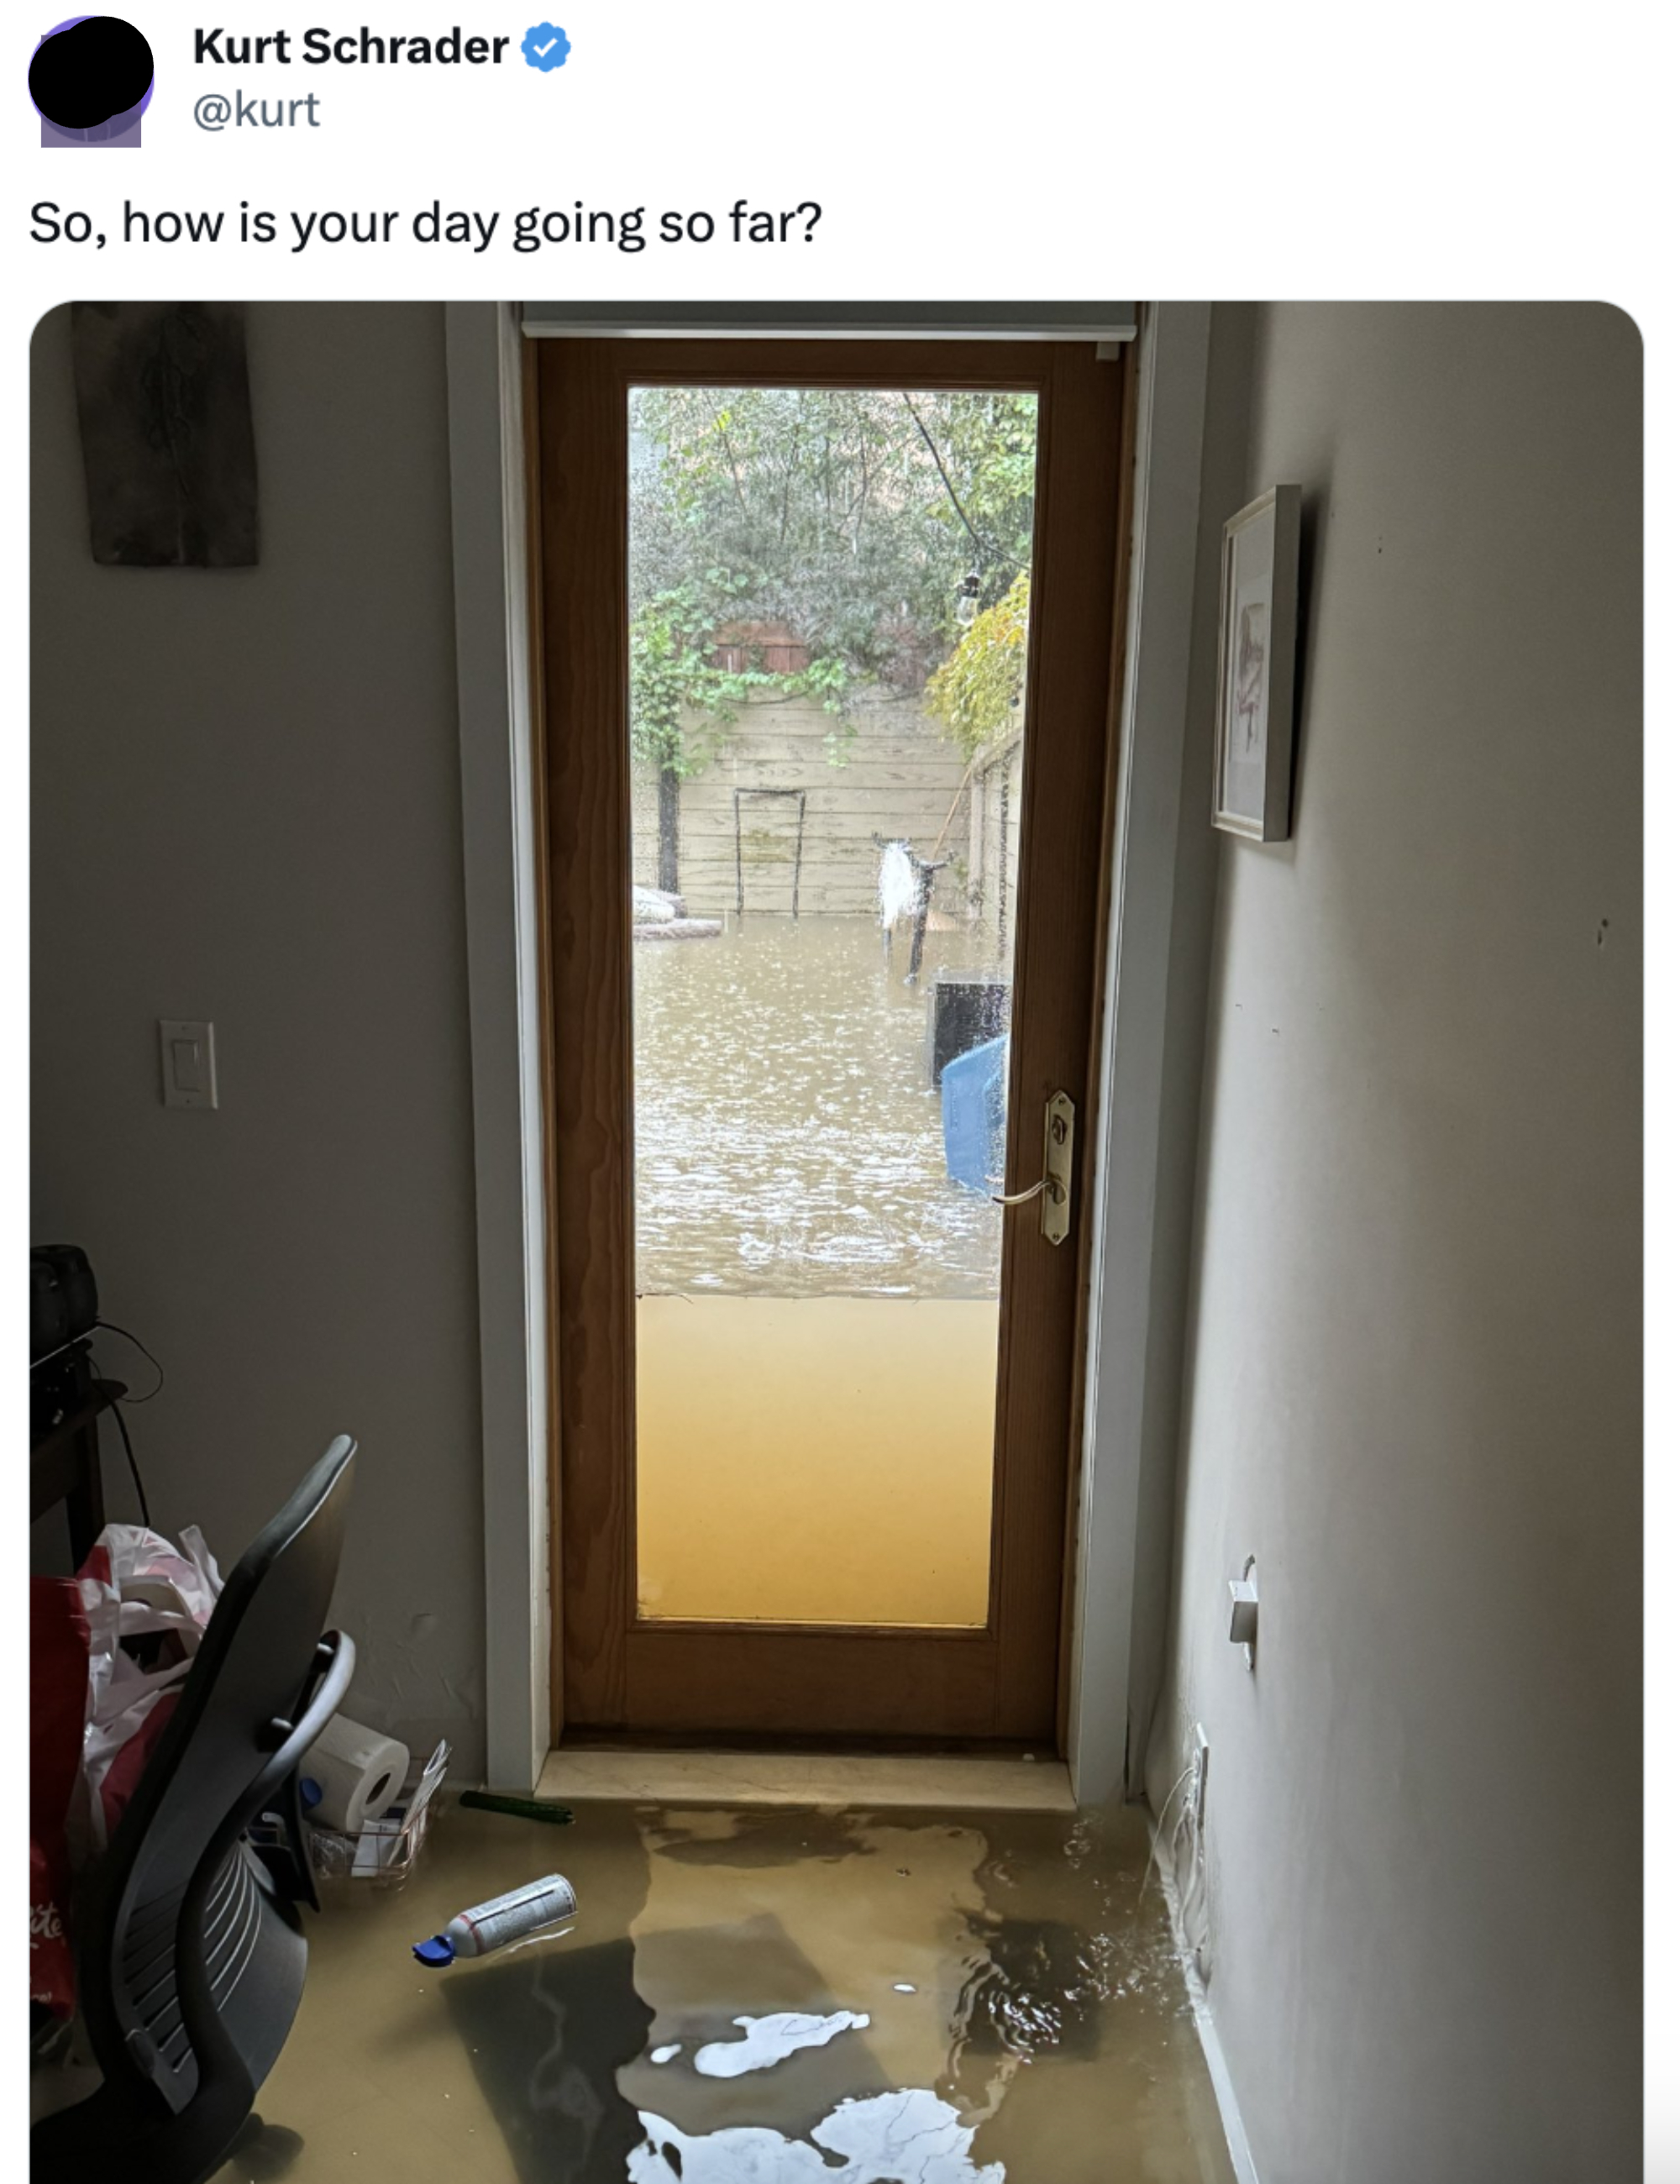 A flooded yard seen through the glass of a front door